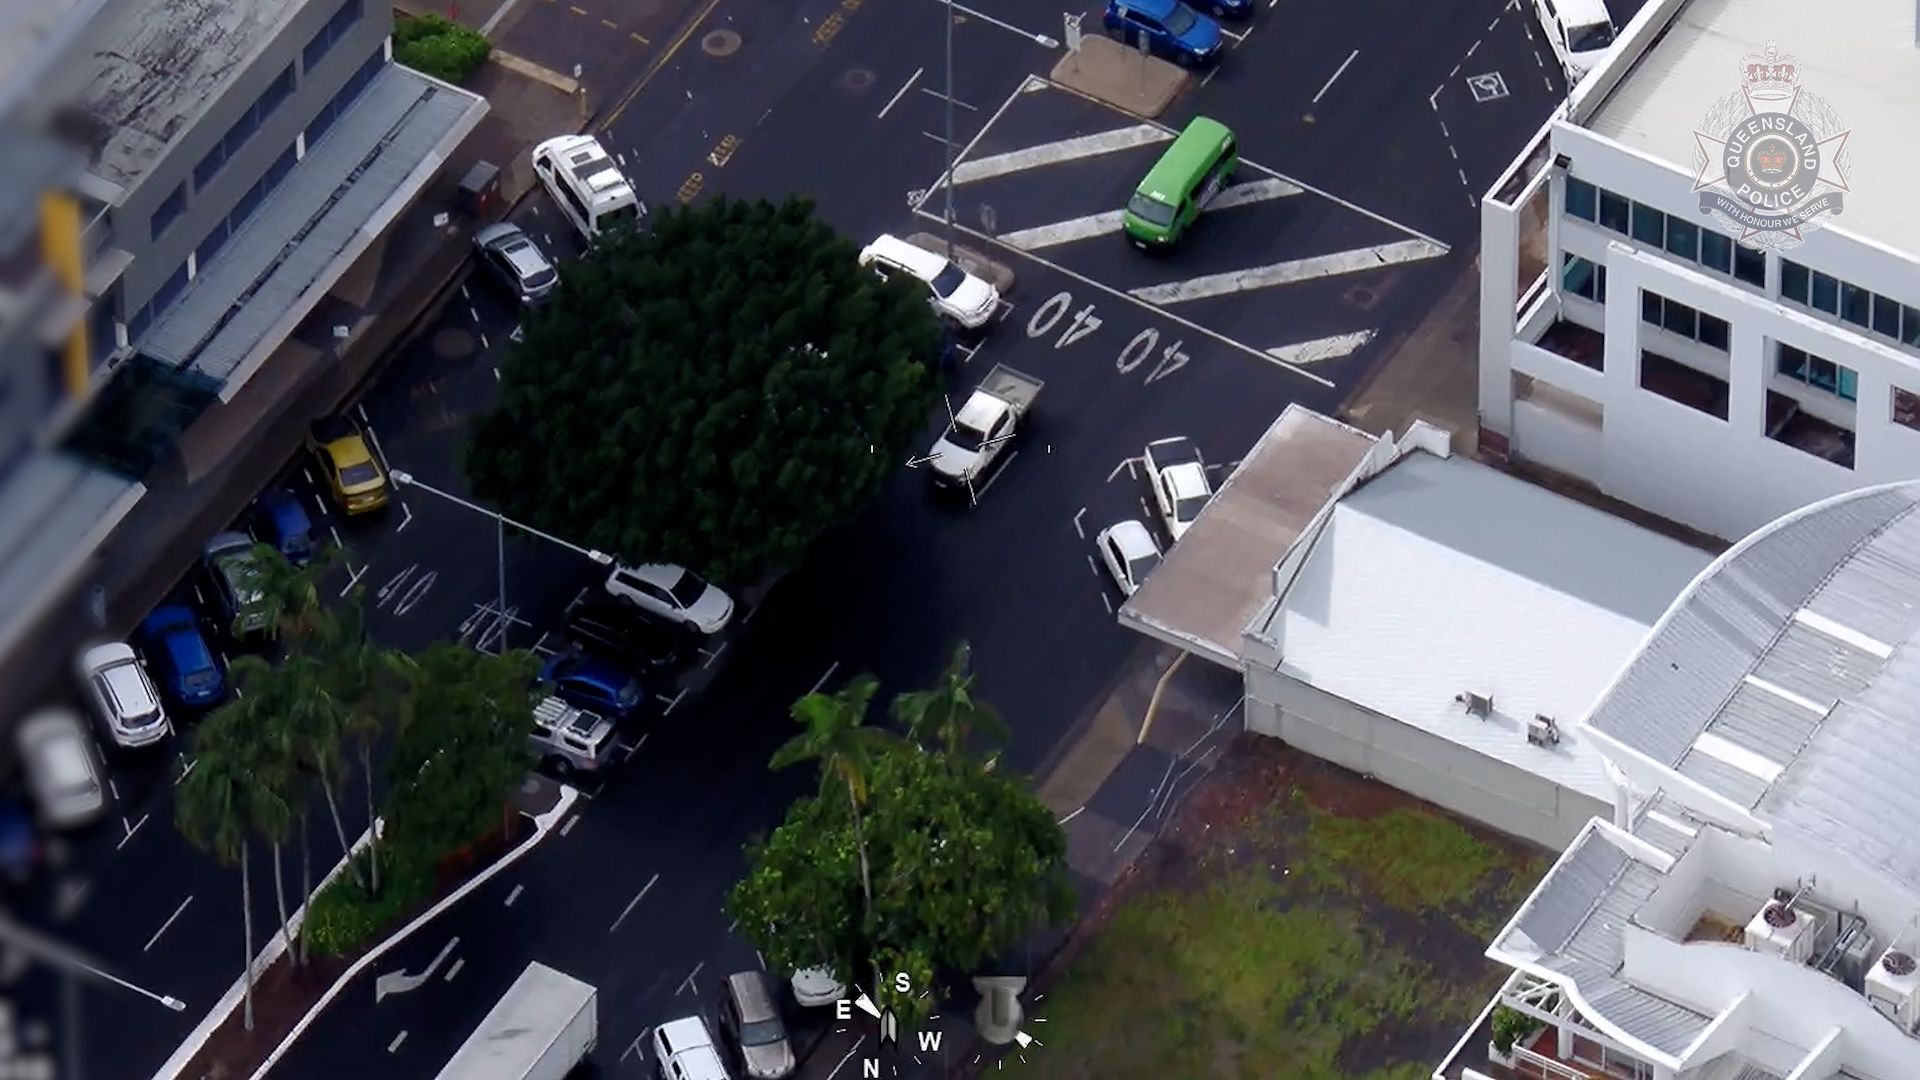 15 people located by Townsville aerial asset during Cairns deployment [Video]